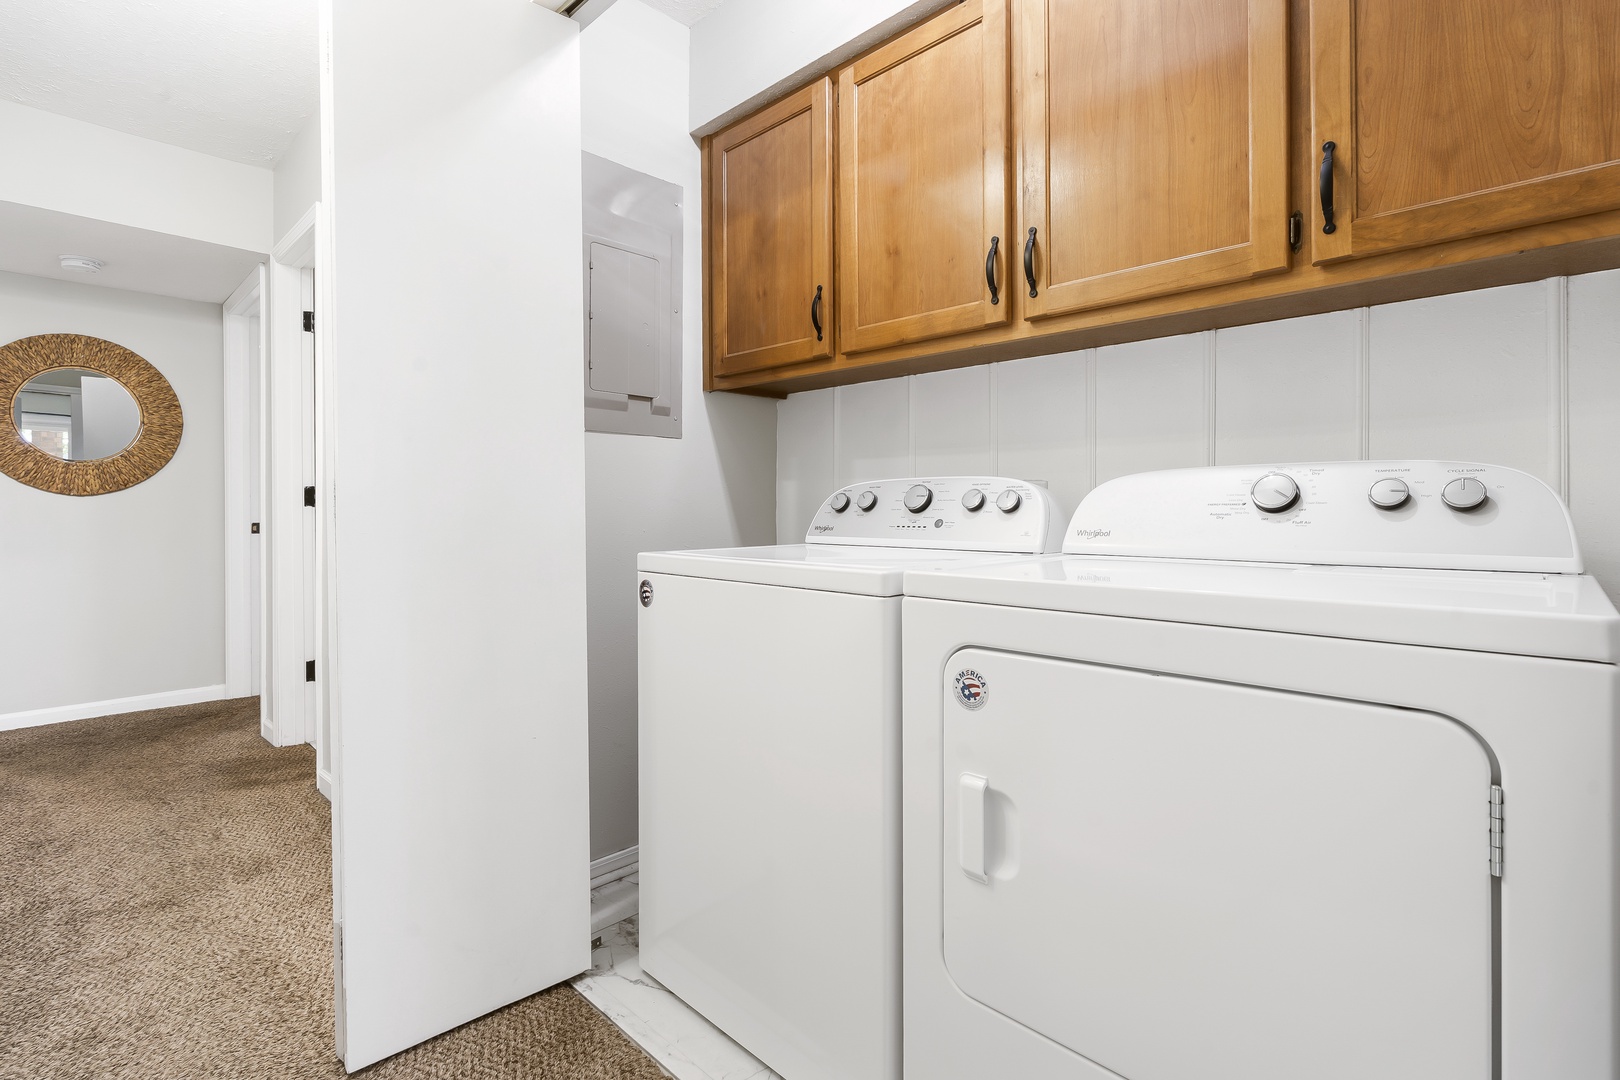 Private laundry is available for your stay, tucked away in the laundry closet